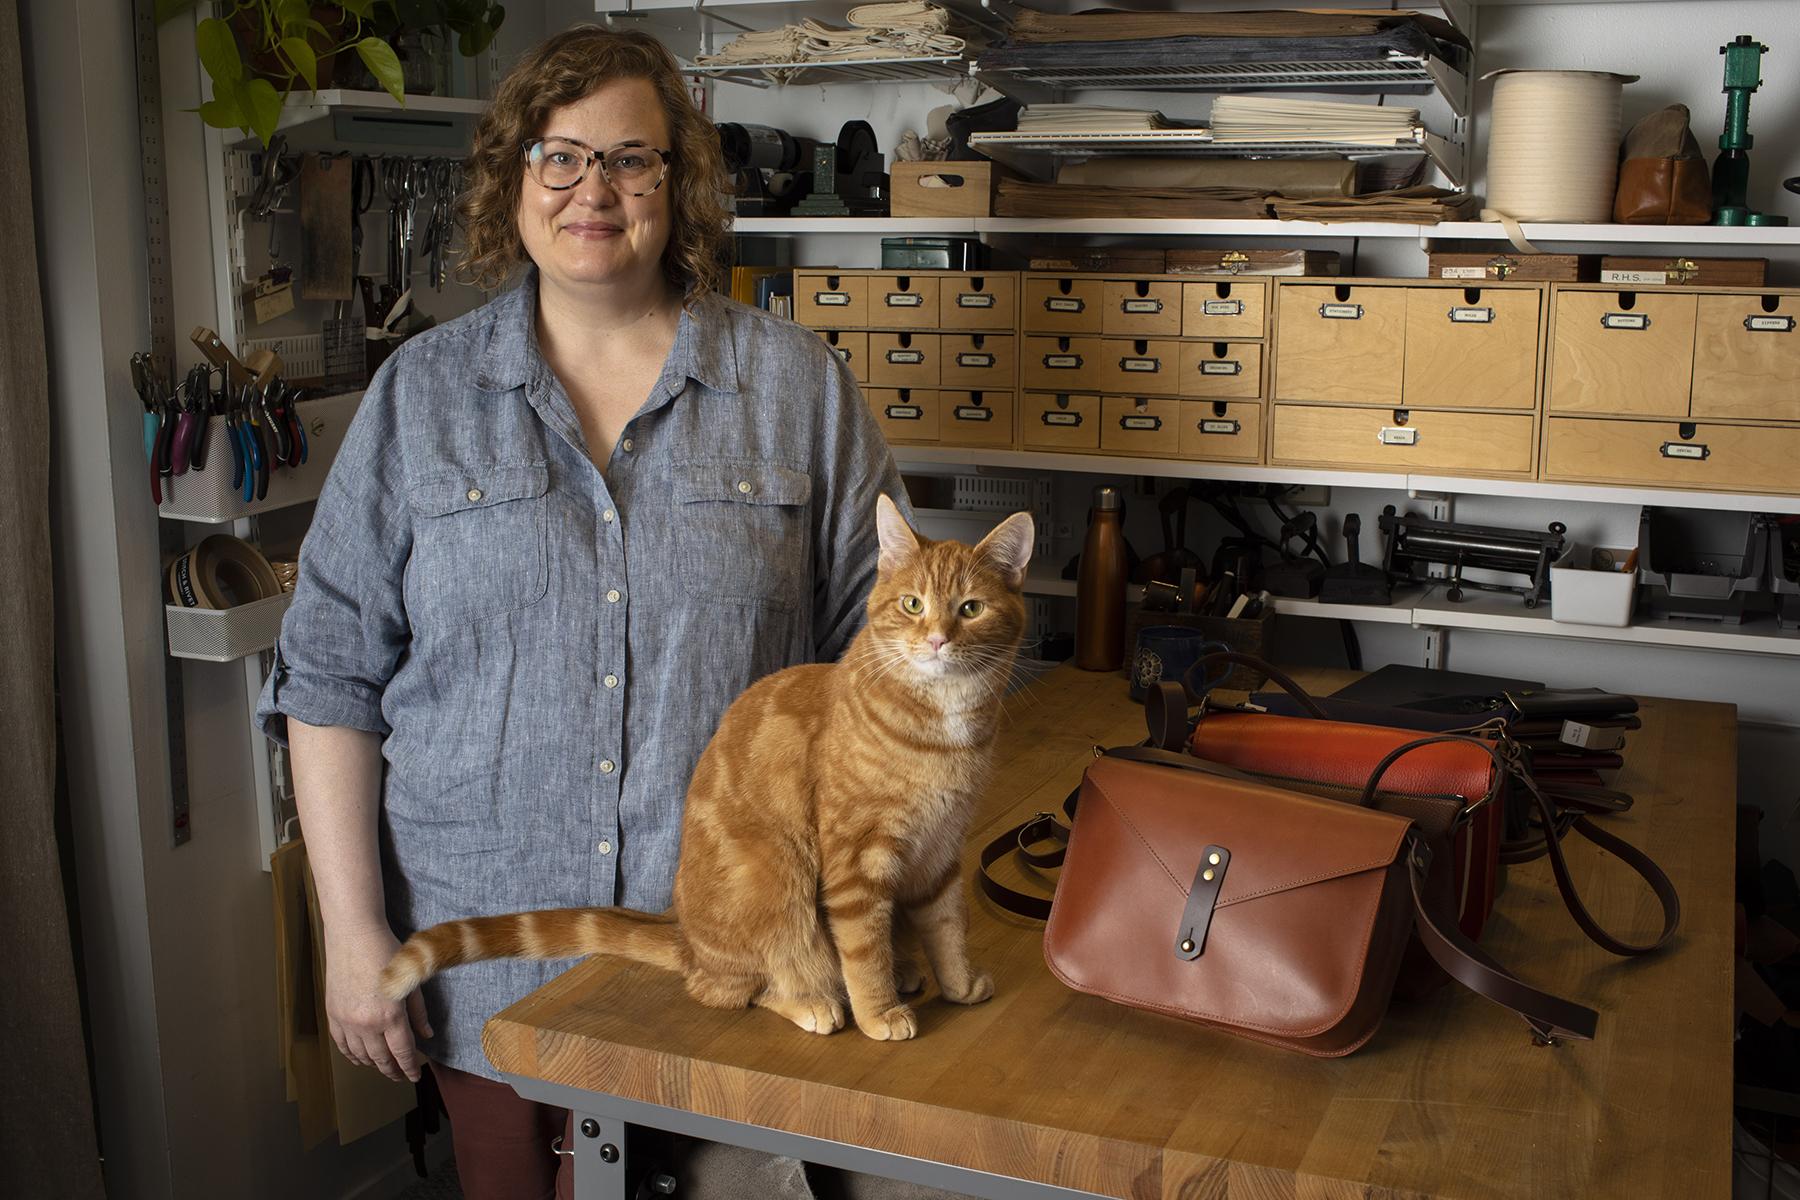 Portraits - HERNDON, VA - APRIL 29: Katie Stack, owner of Stitch and...